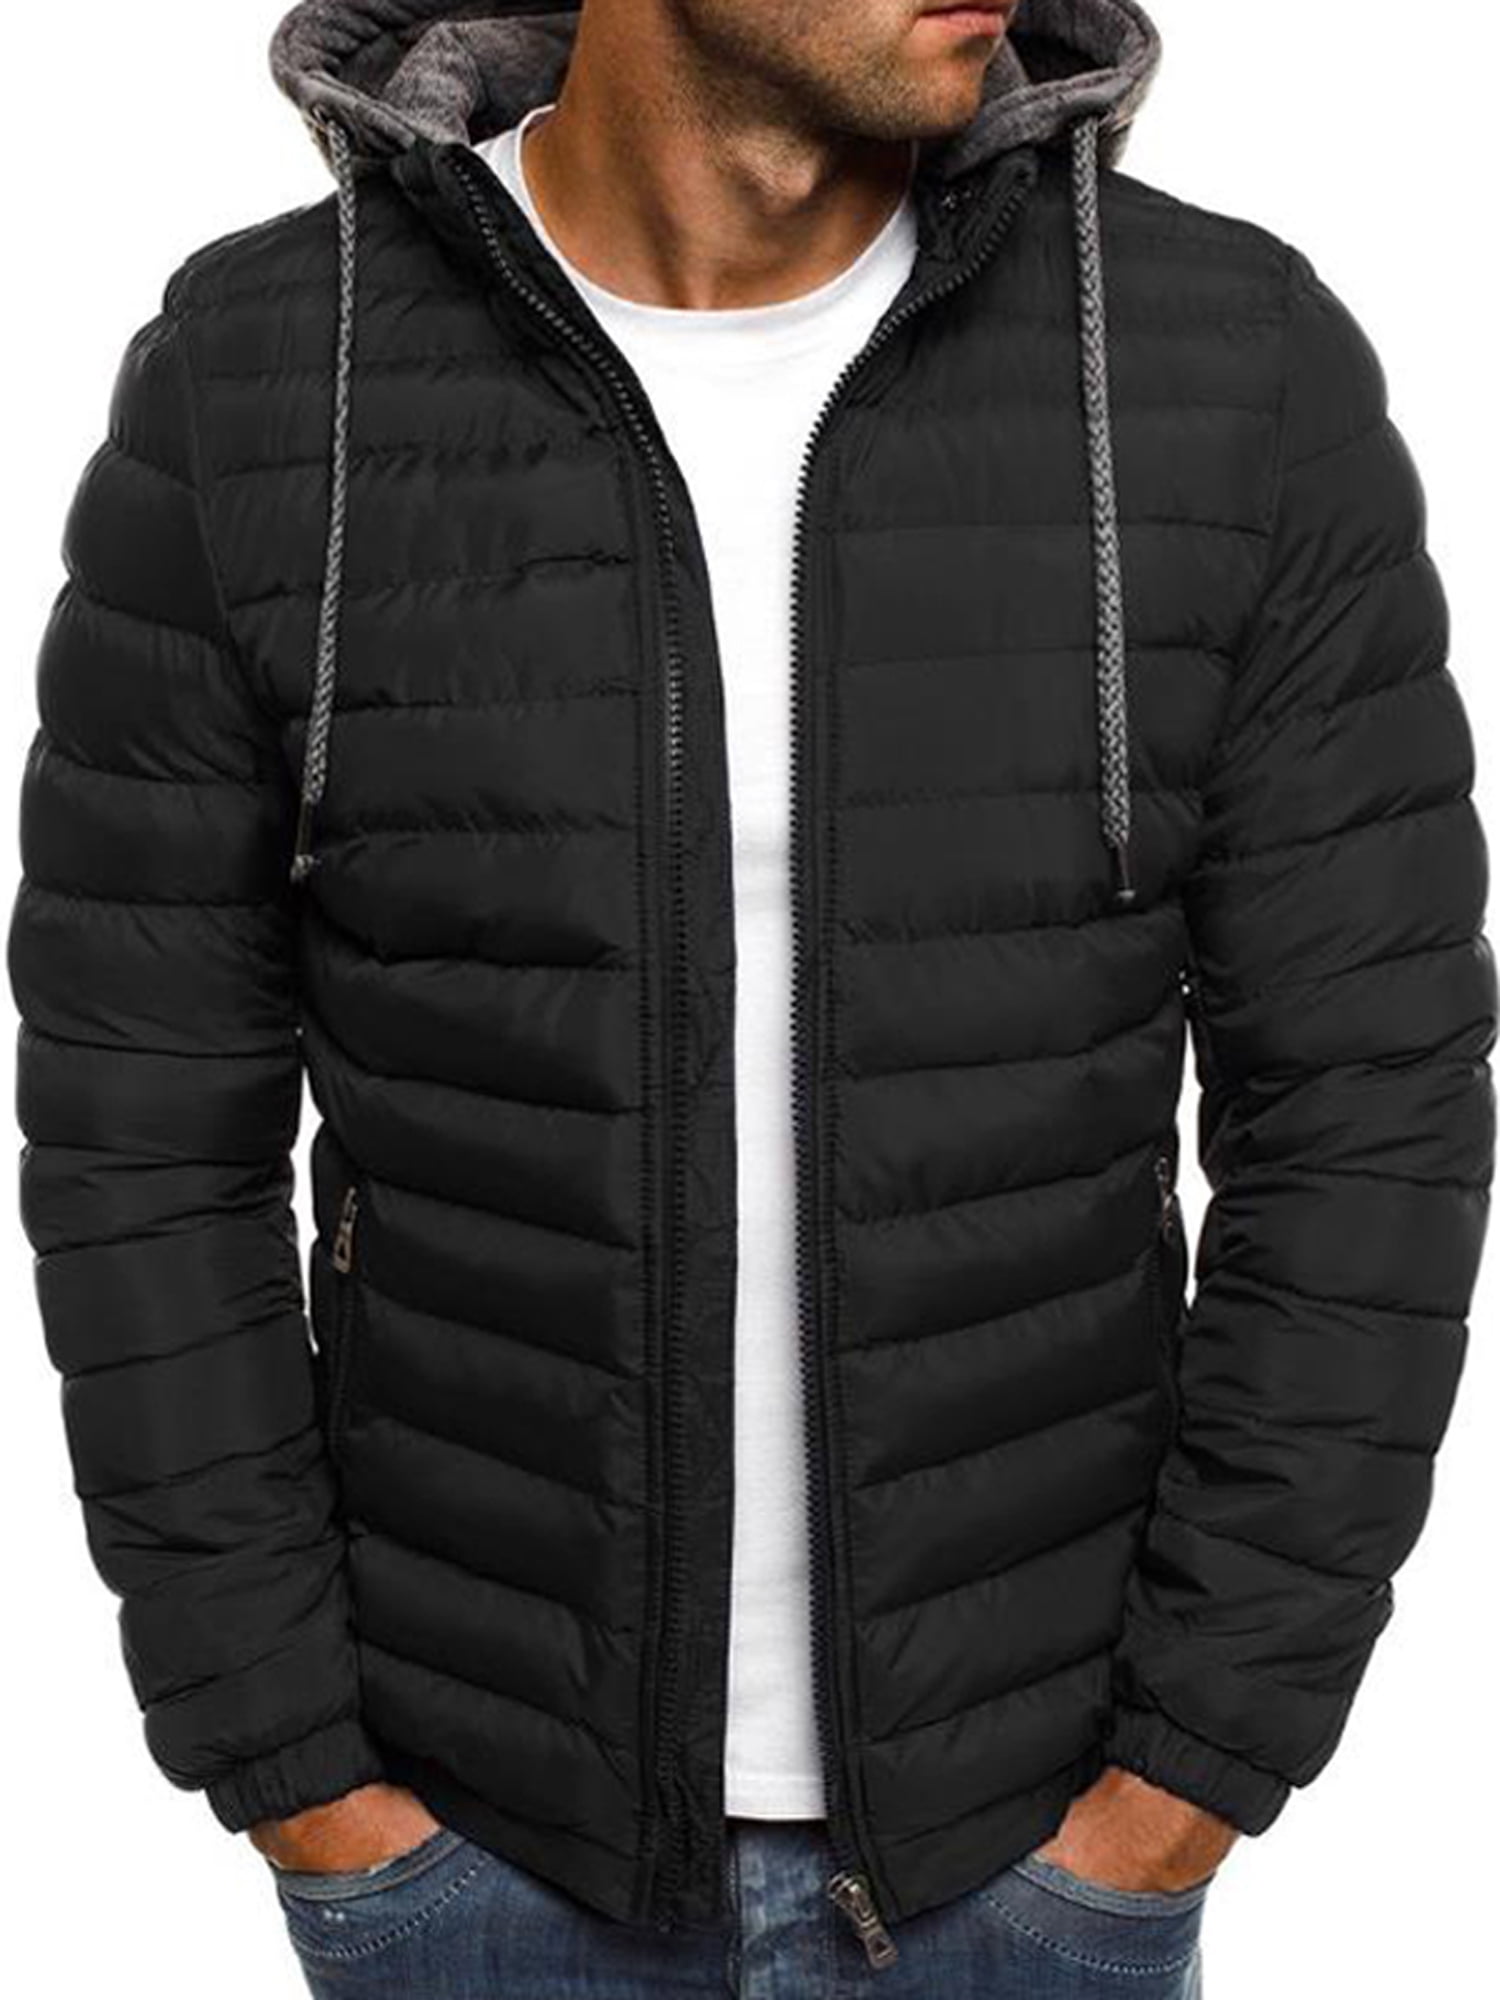 Big and Tall ZENTHACE Mens Long Down Coat Winter Warm Down Puffer Jacket with Hood